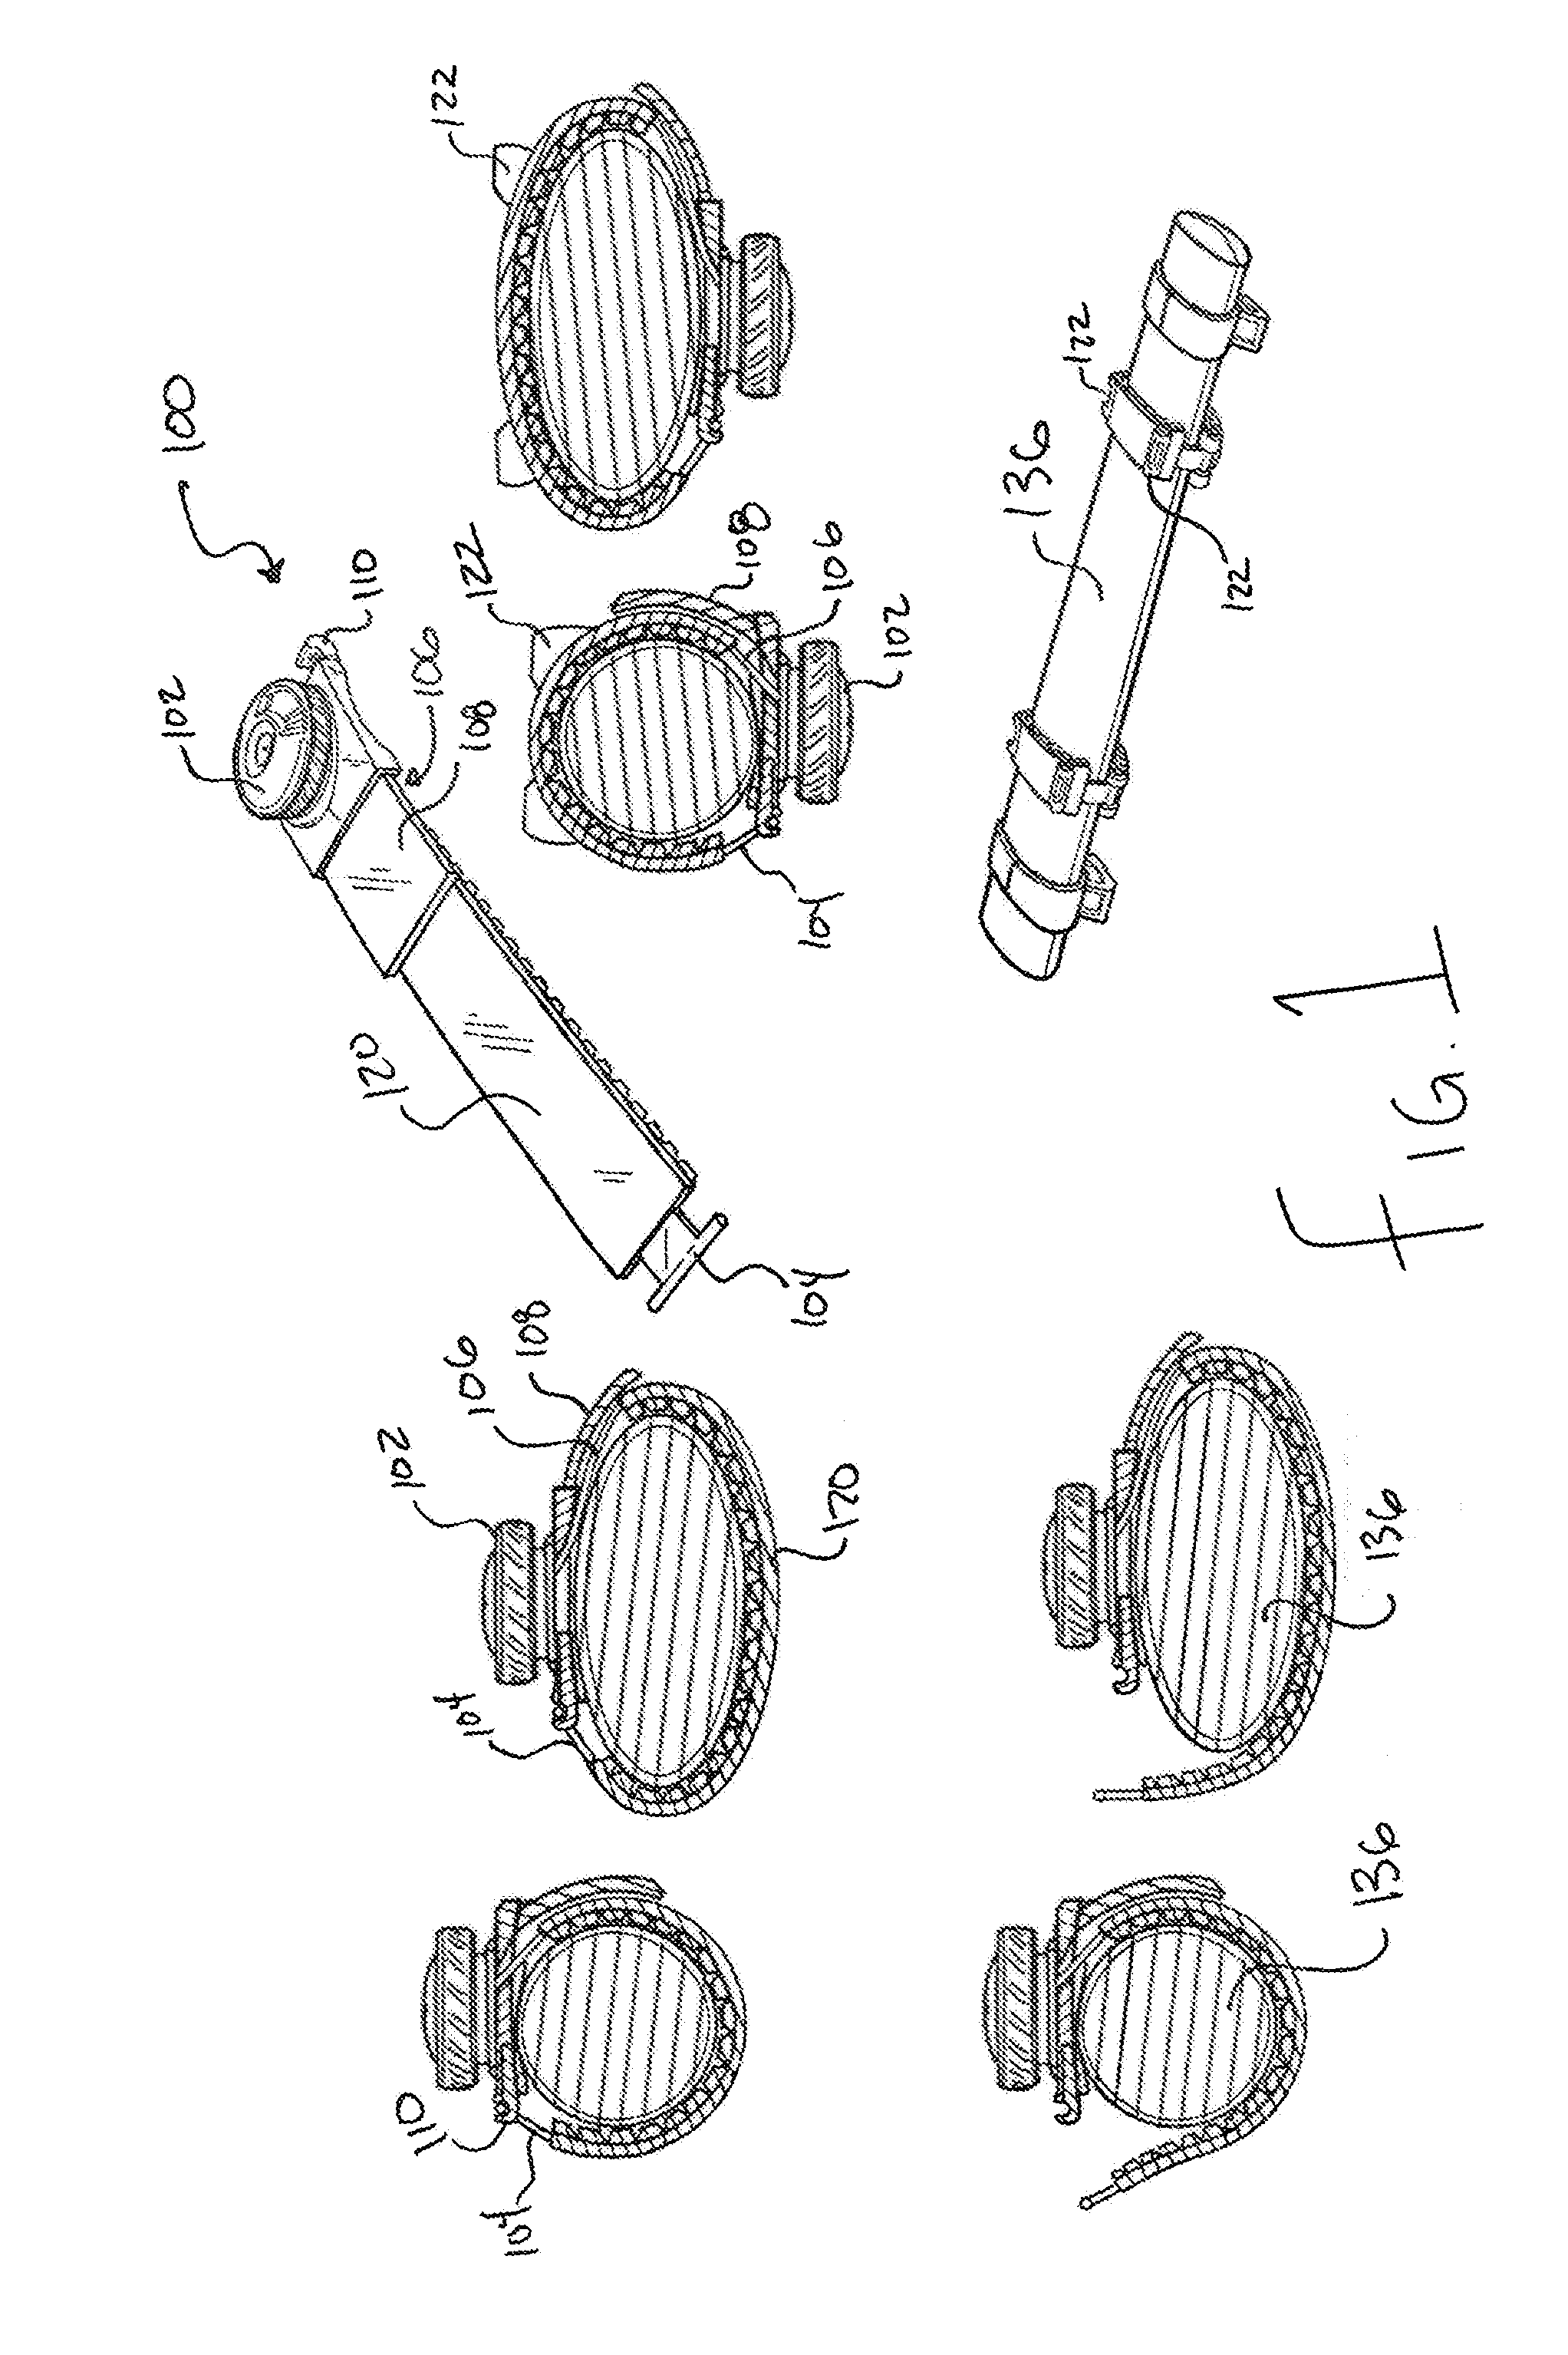 Closure devices for coupling components to racks and methods therefor